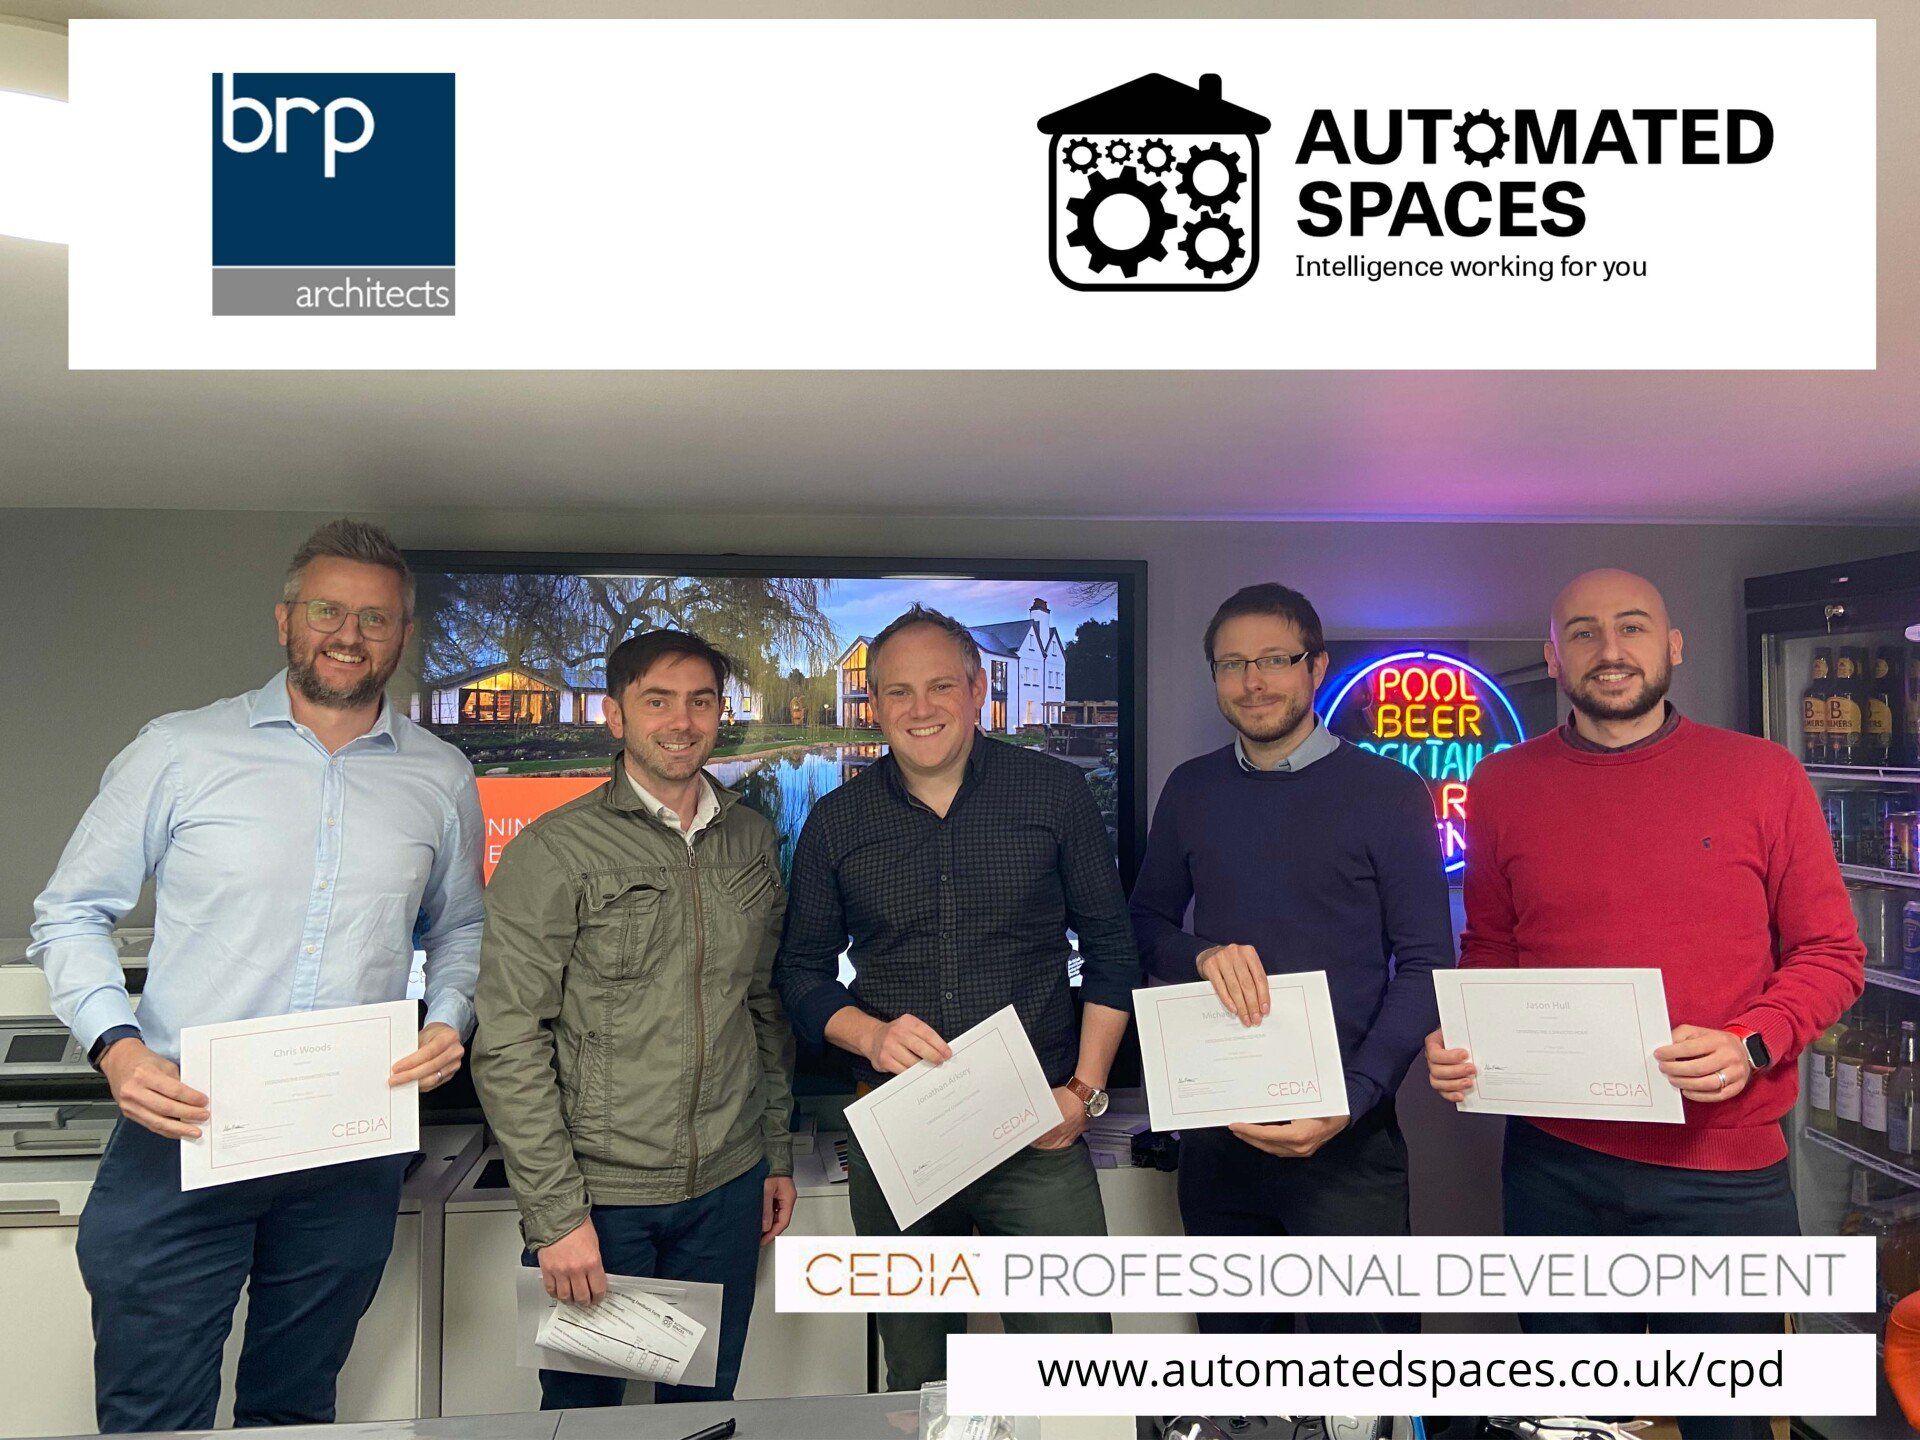 Photograph of BRP Architects attending a CPD at Automated Spaces